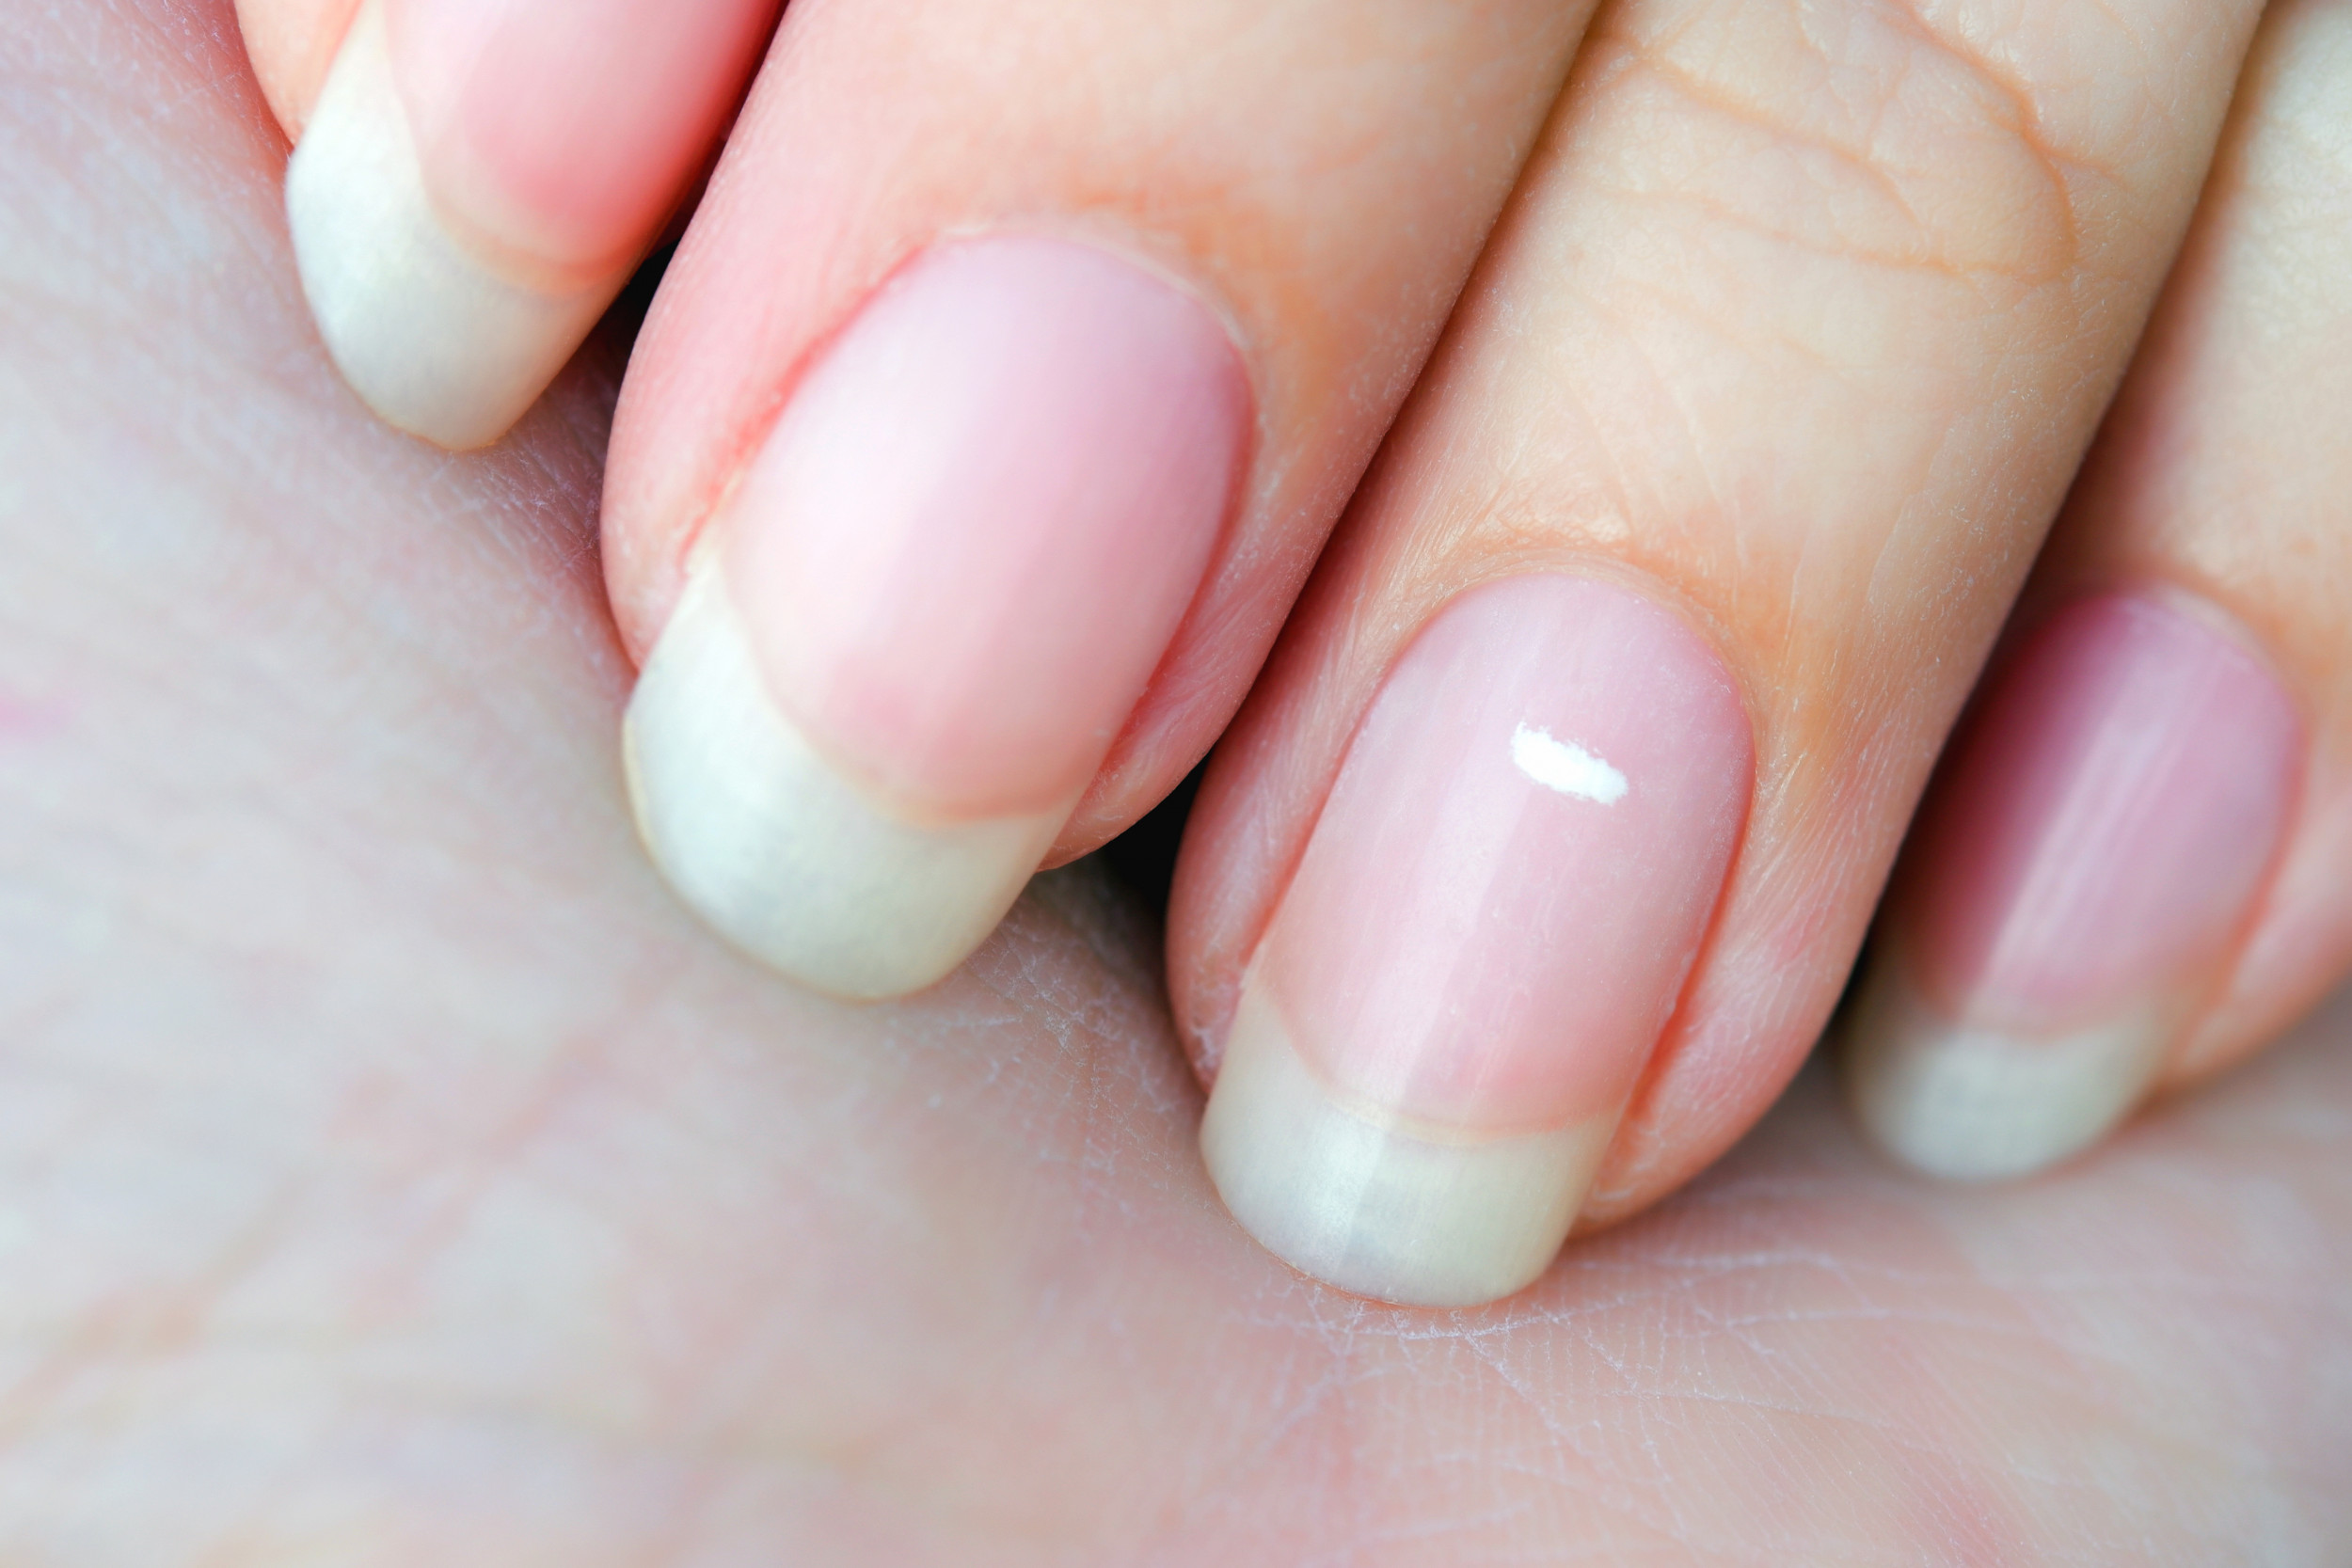 Polygel nail extensions - Everything you need to know